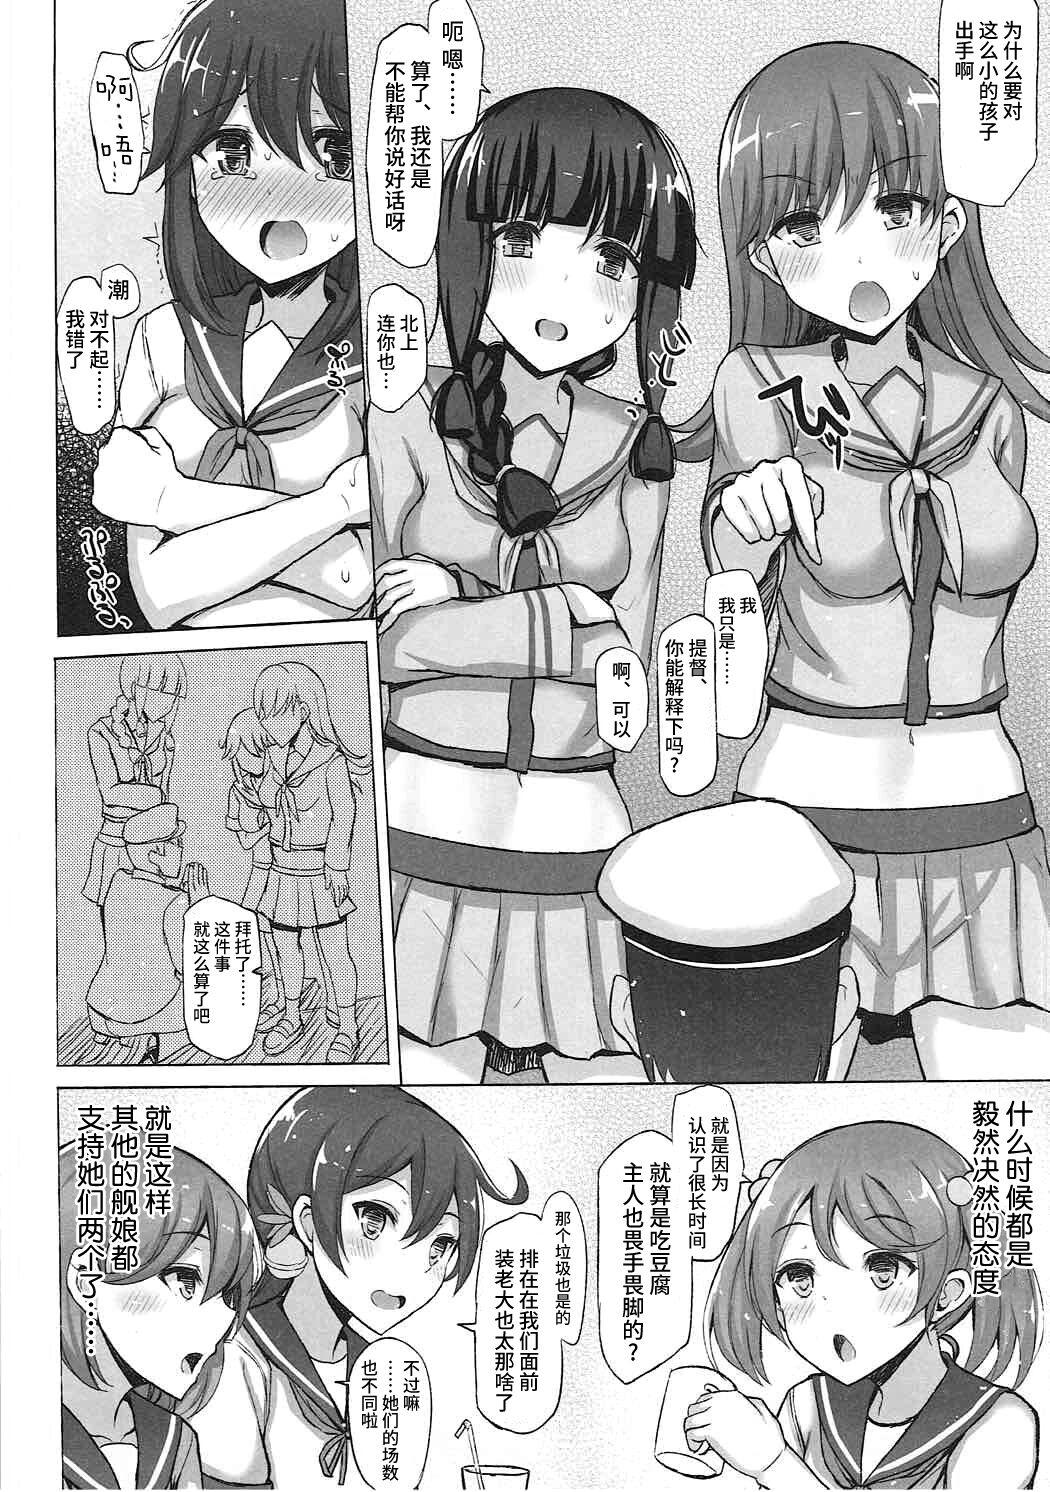 Gays AS YOU ARE. - Kantai collection Sex Massage - Page 3